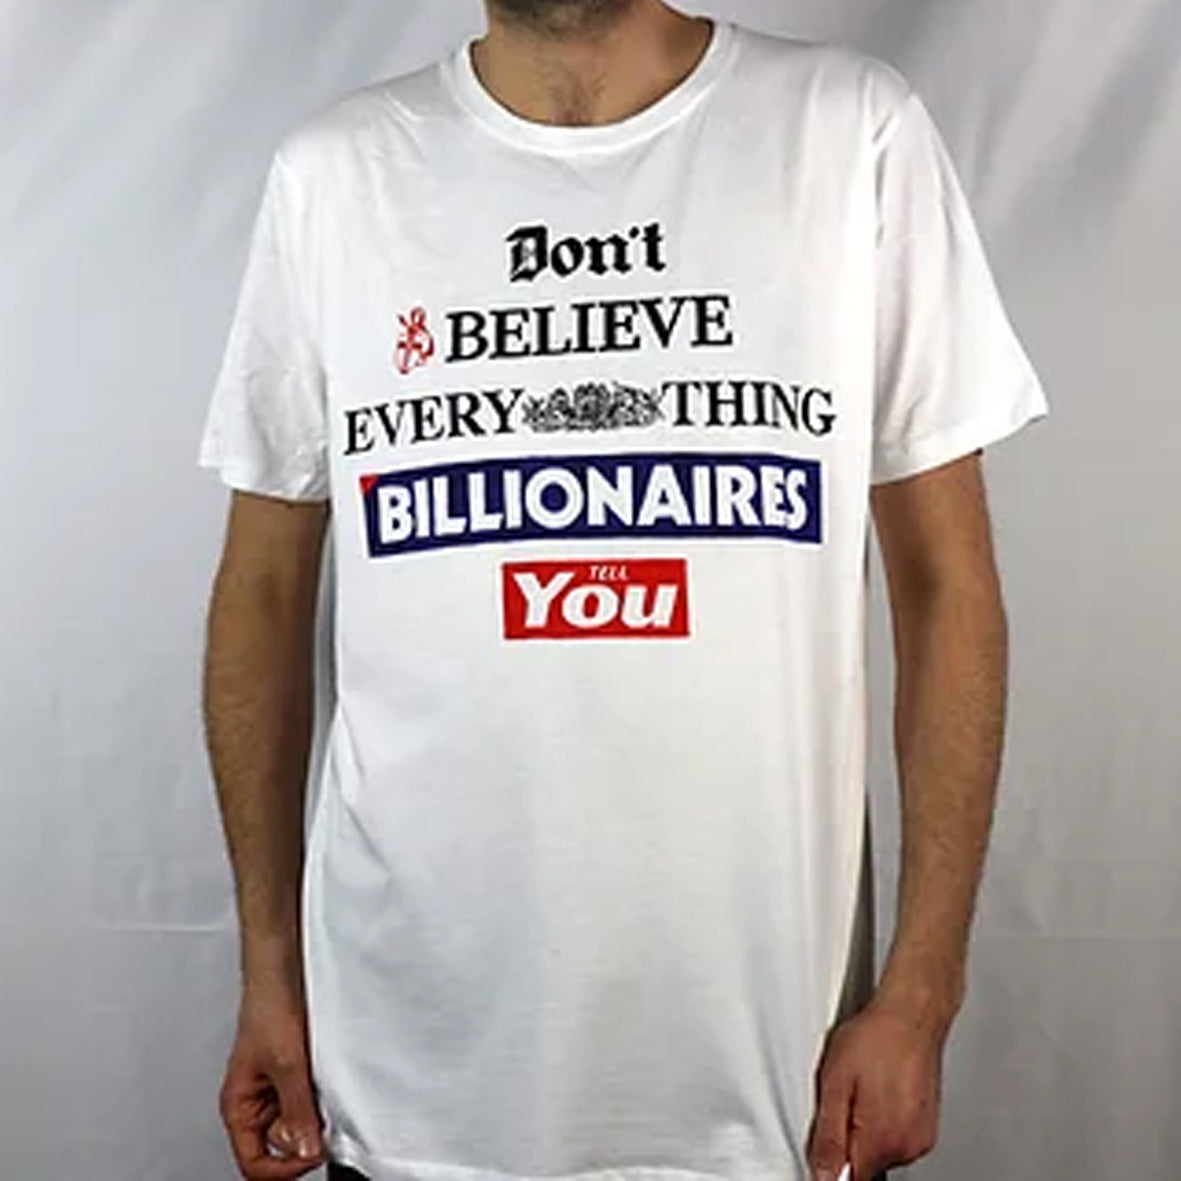 T-Shirt - Don't Believe Everything Billionaires Tell You